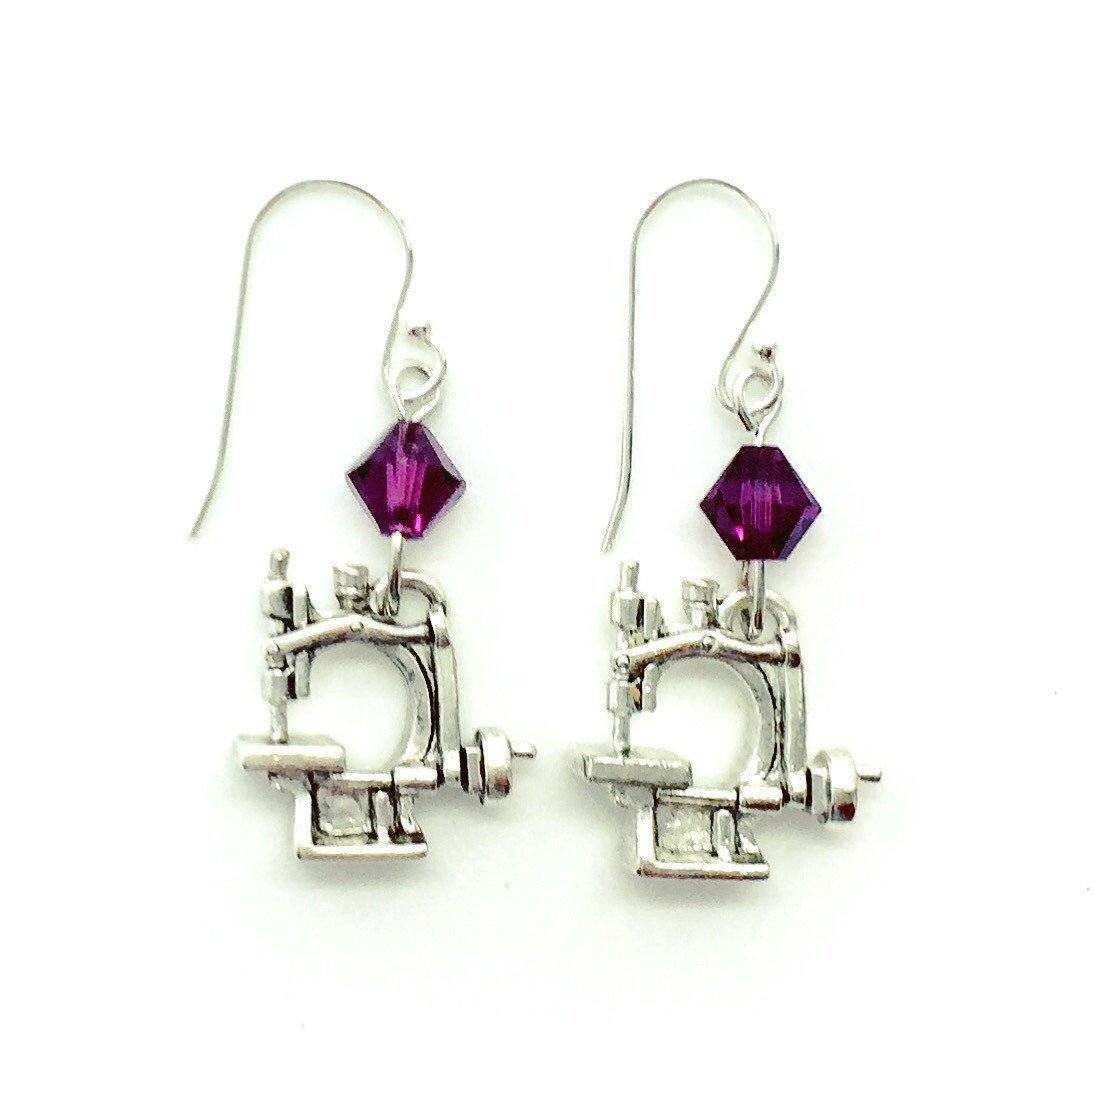 Hand Crank Sewing Machine Silver Earrings with Purple Swarovski Crystals-Watchus